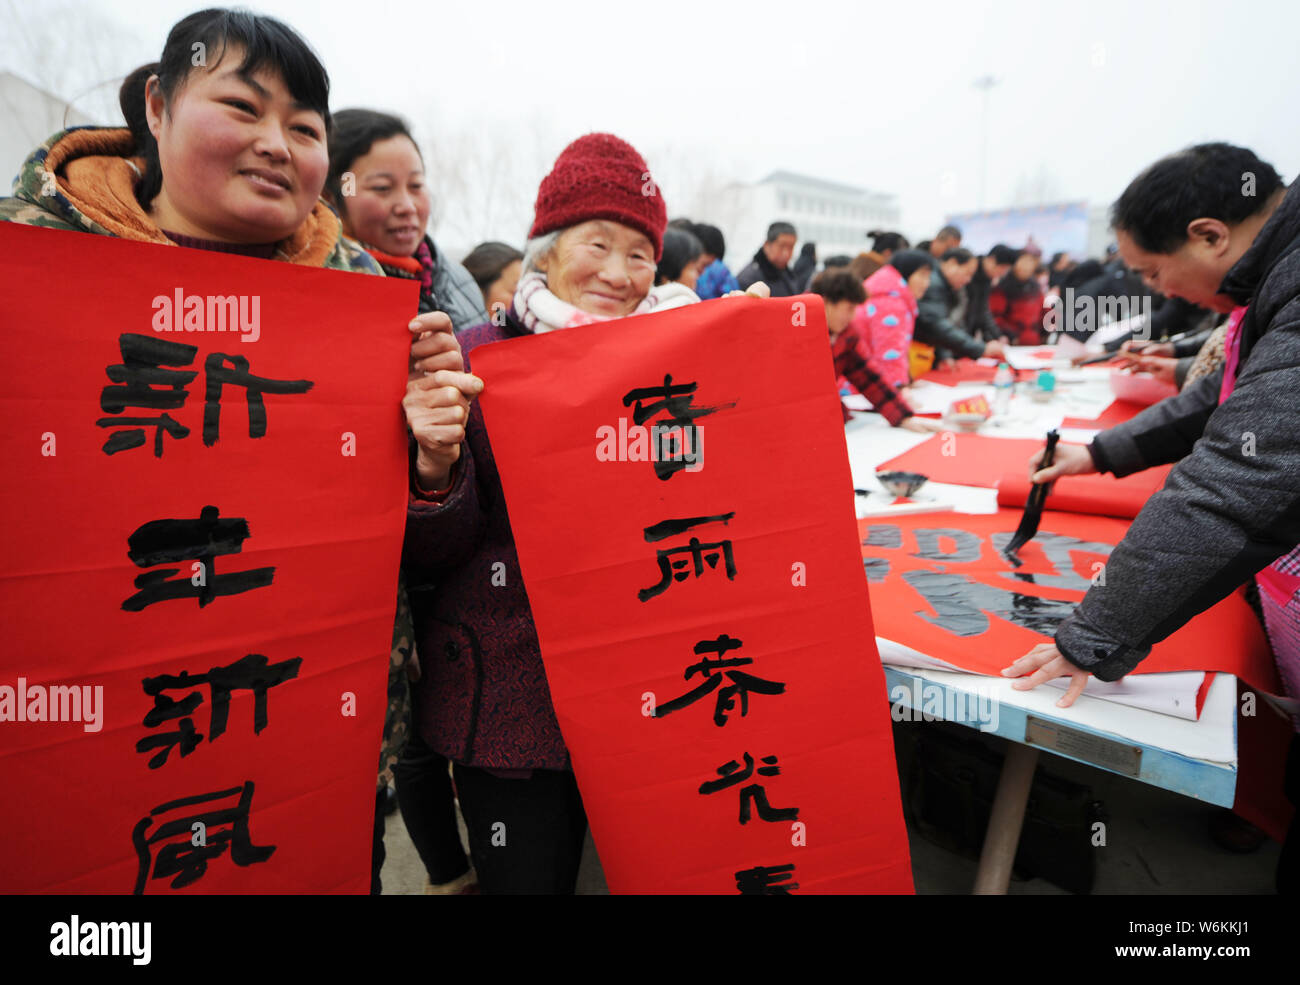 Calligraphers write couplets for the upcoming Spring Festival or the Chinese New Year (Year of the Dog) to villagers at Wuxiaoge village of Bozhou cit Stock Photo